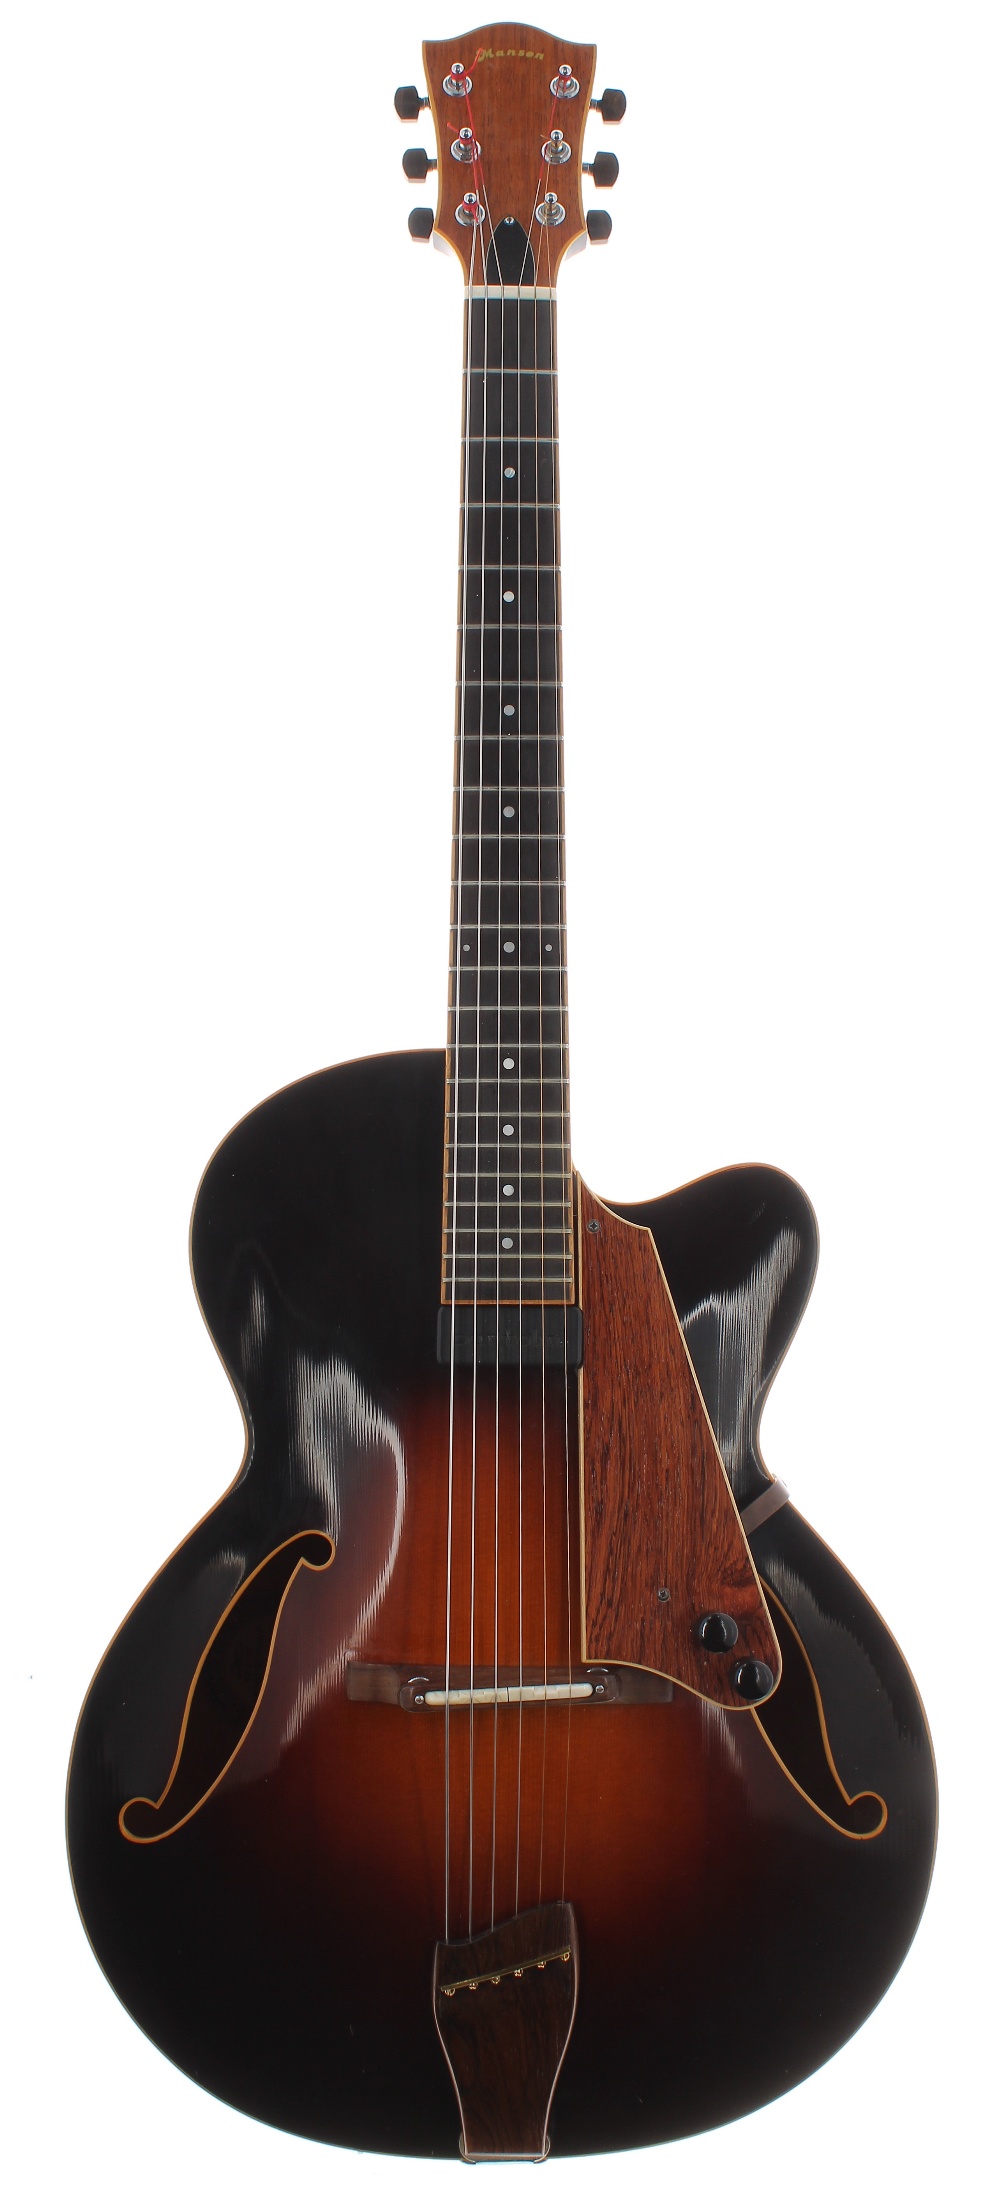 1984 Andy Manson Dove archtop guitar, made in Crowbrough, Sussex, England; Finish: sunburst, small